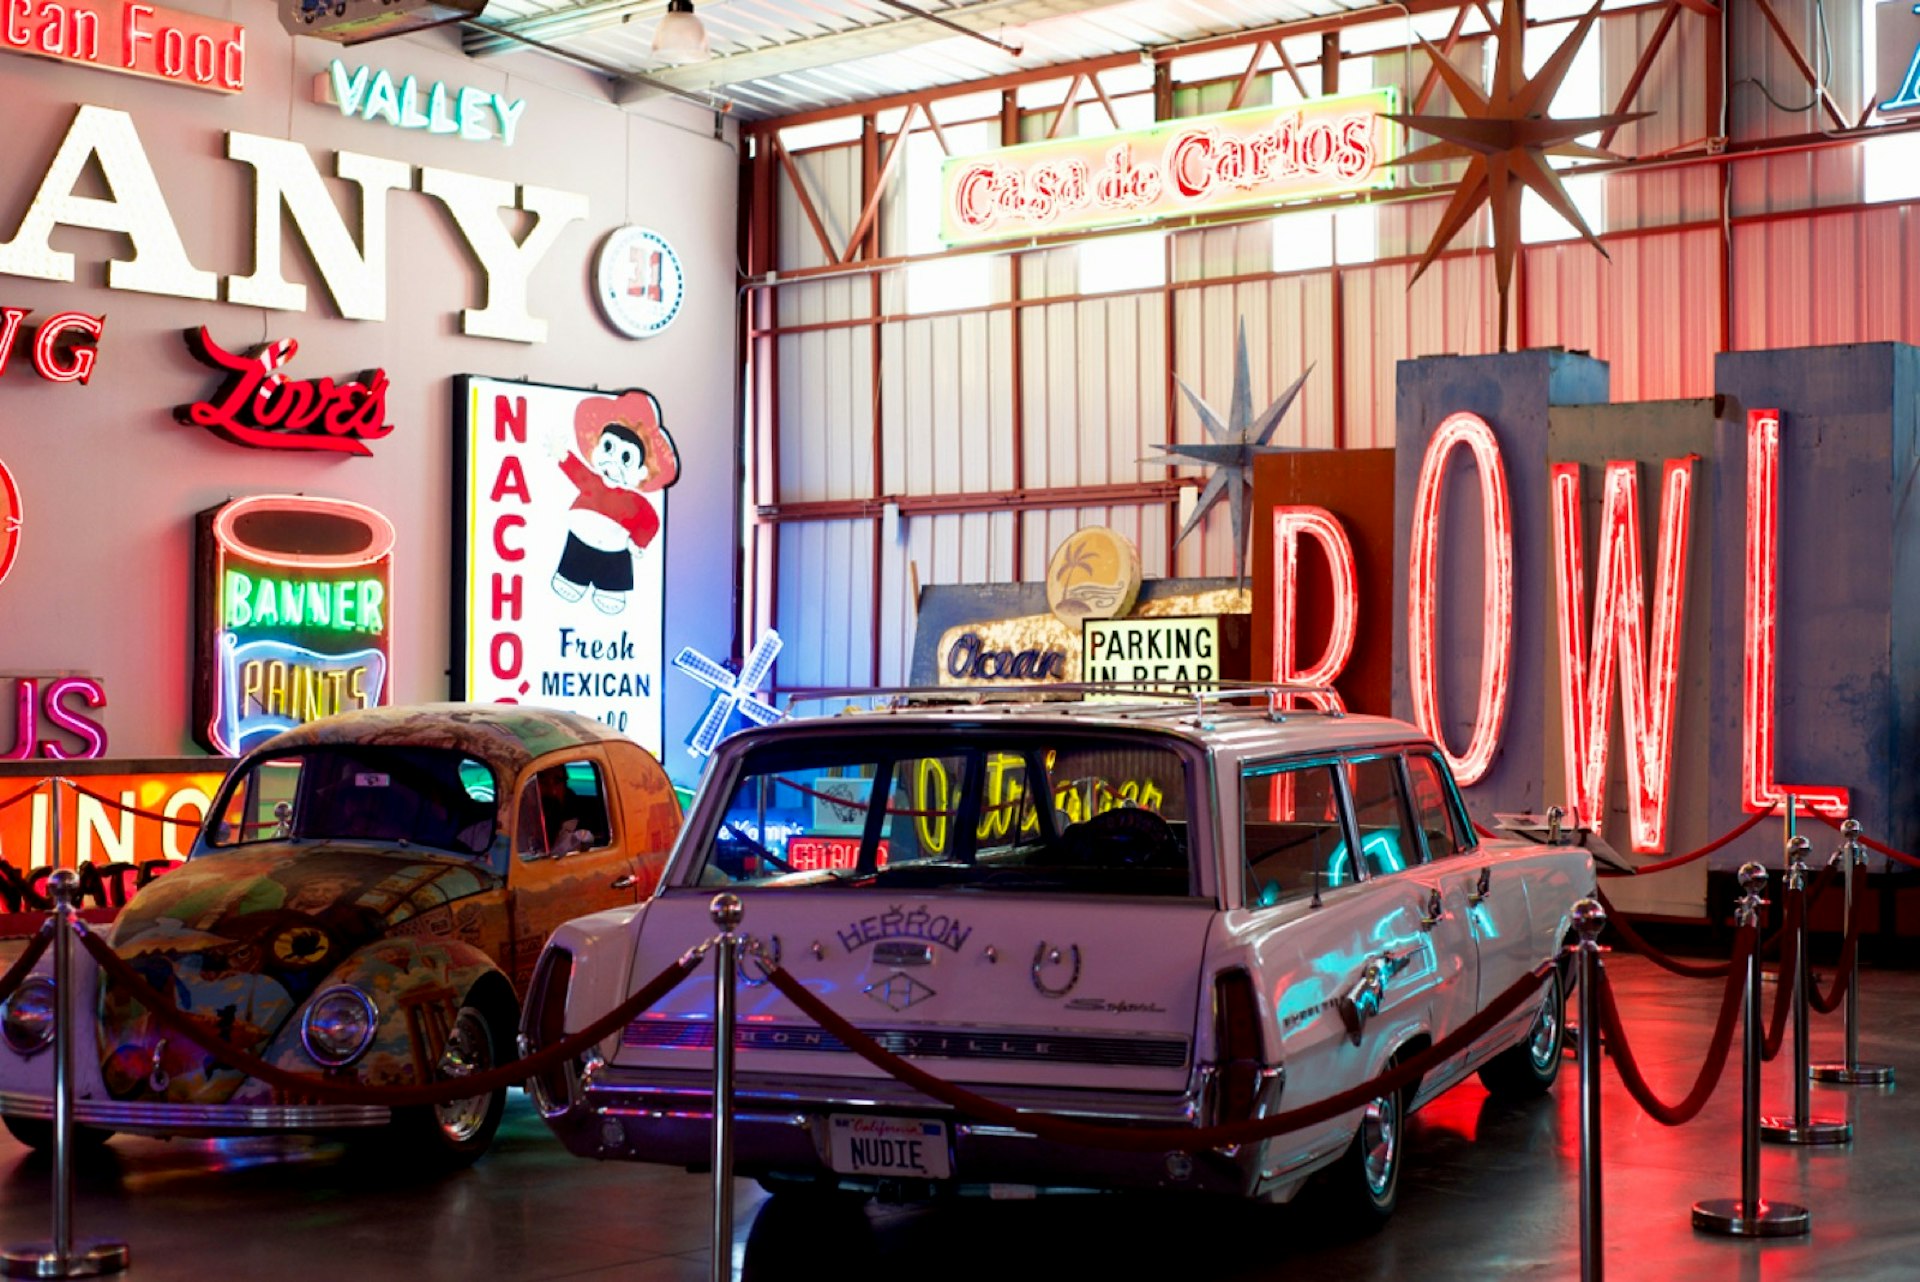 Several vintage signs, as well as decorated cars, are roped off in a warehouse-like exhibition; Los Angeles neon